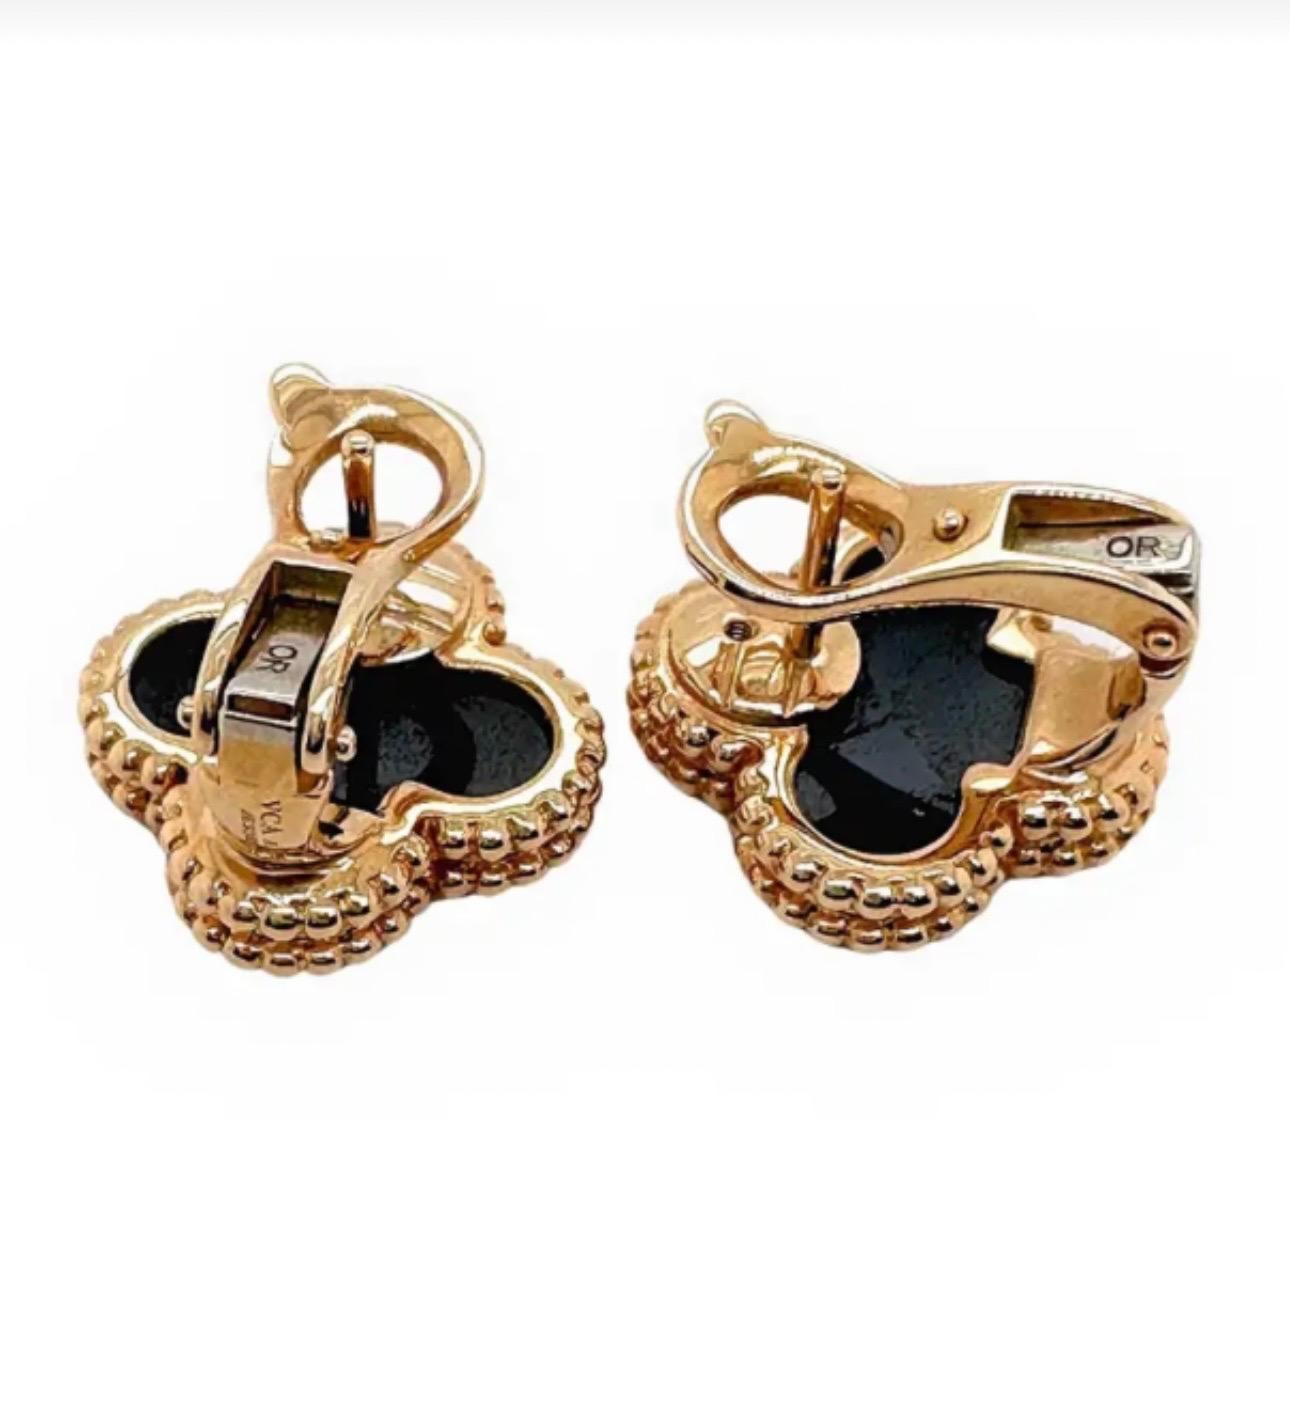 This classic Van Cleef & Arpels Earring from the iconic Vintage Alhambra collection is crafted in 18k yellow gold and features 1 lucky clover motifs earring beautifully inlaid with black onyx in round bead settings. Made in France circa 2012. 
This